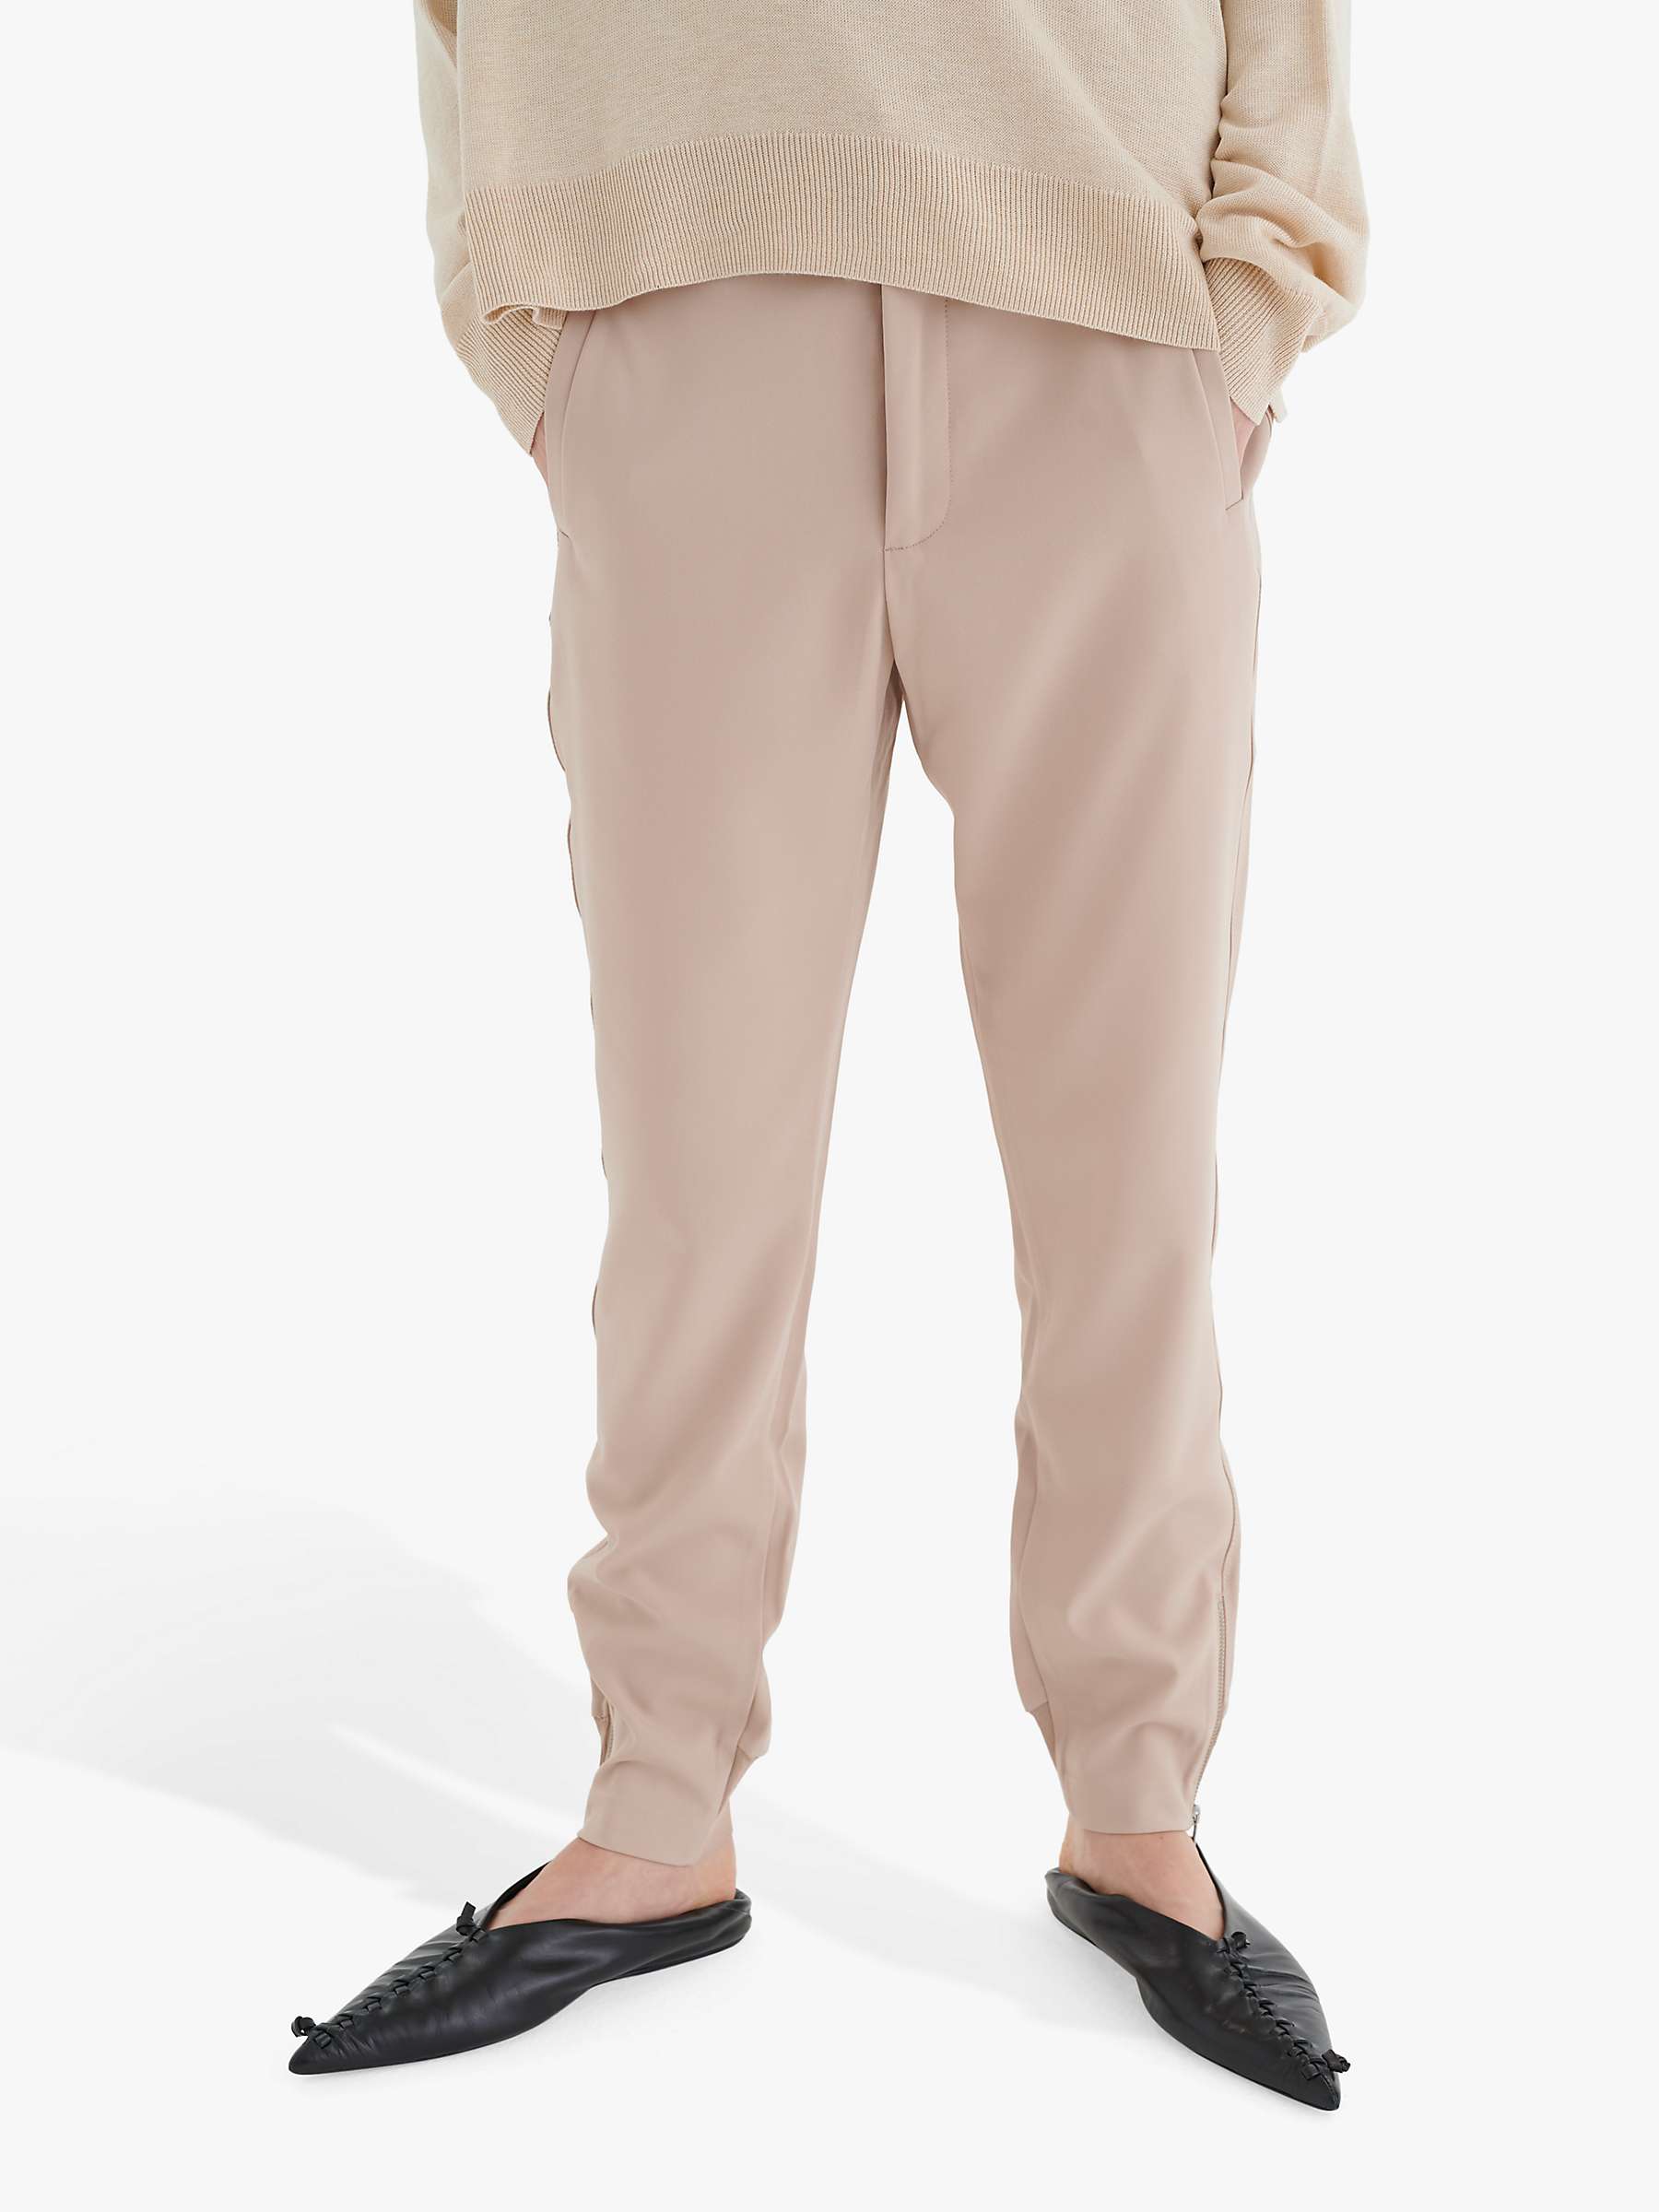 Buy InWear Nica Suit Trousers Online at johnlewis.com